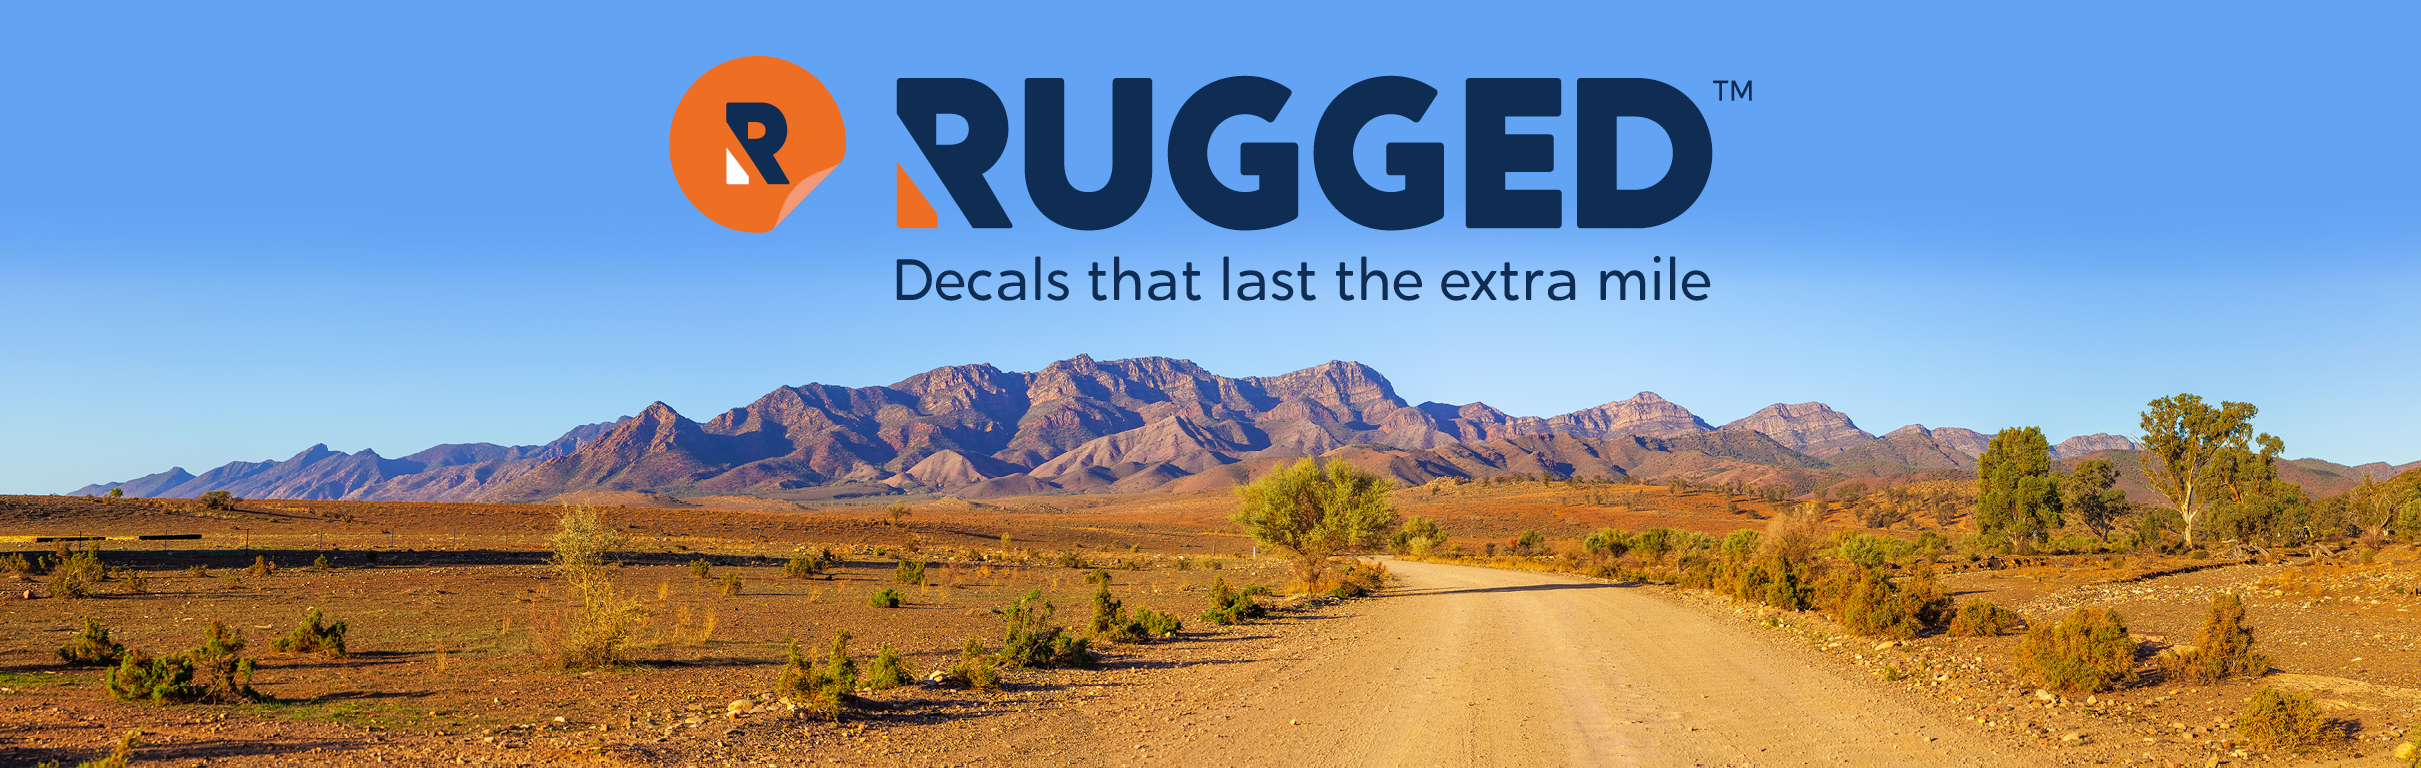 RUGGED - Decals that last the extra mile